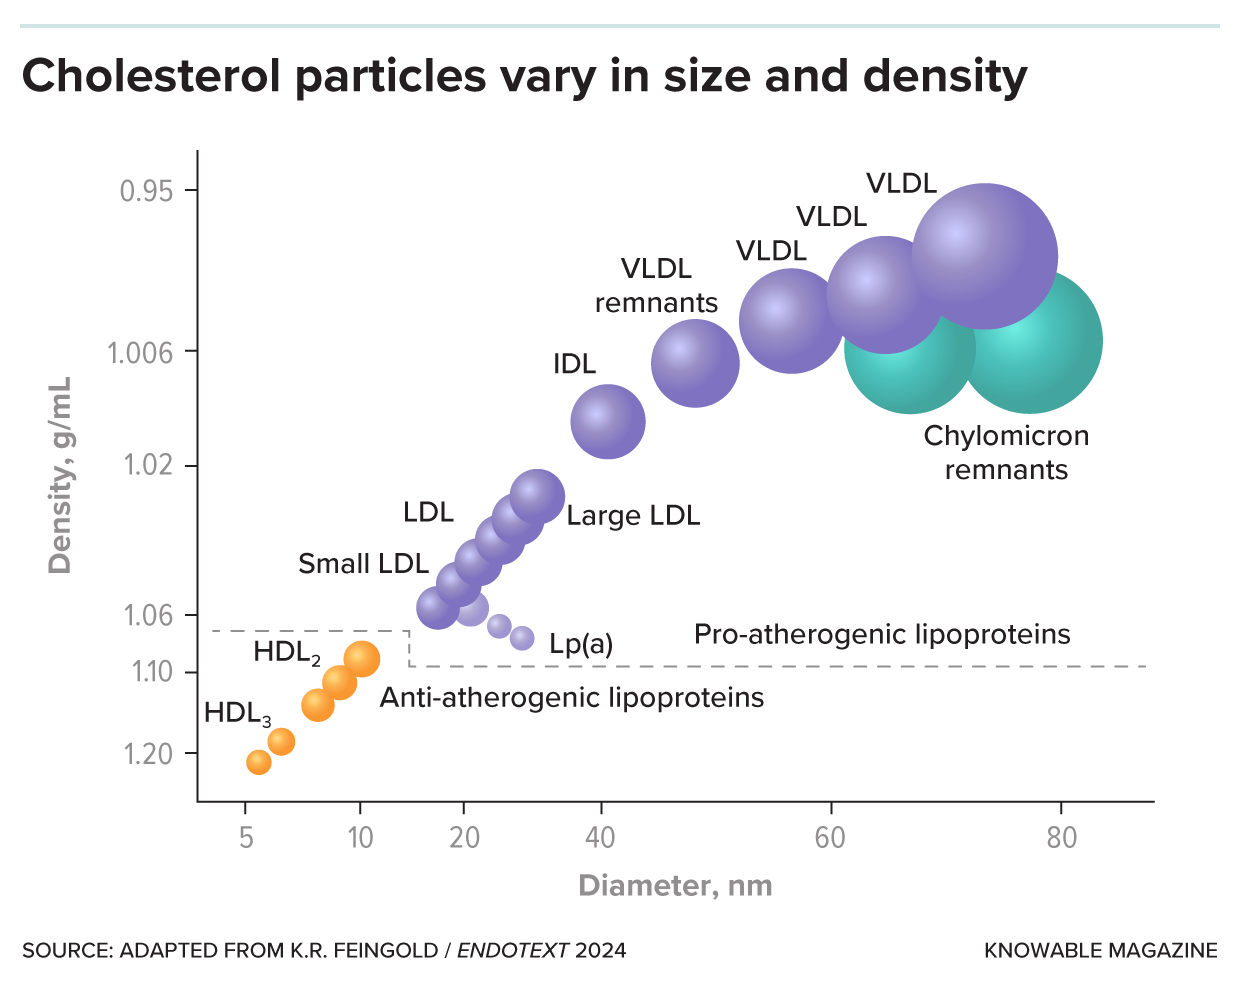 Depending on their composition, lipoprotein particles can be of different sizes and densities, from small and dense like HDL to large and less dense like chylomicrons and VLDL. Credit: Knowable Magazine